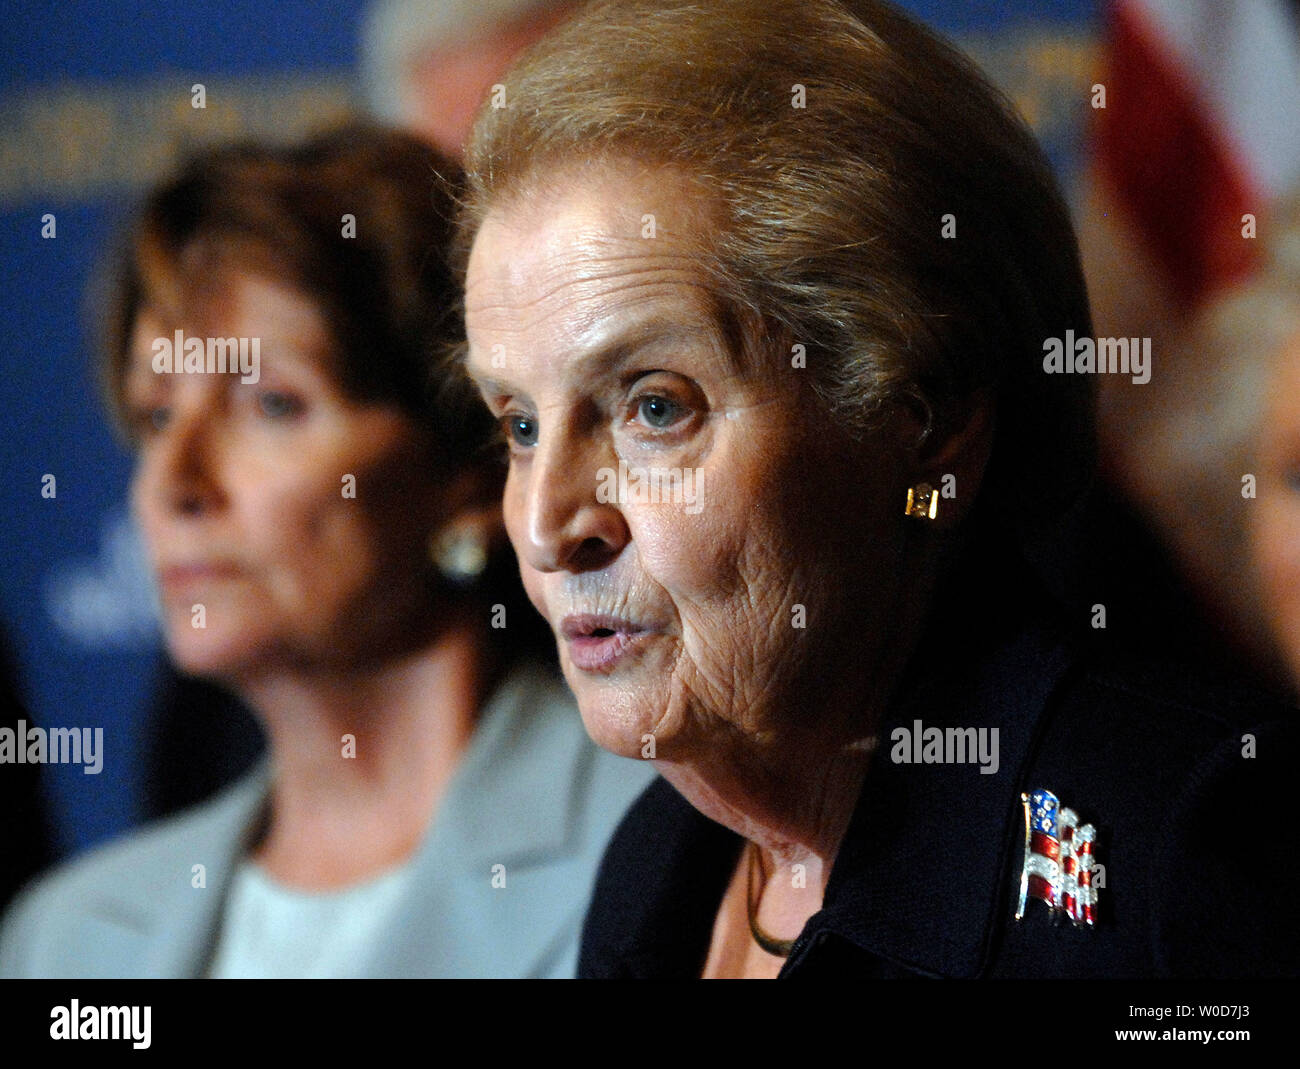 Former Secretary of State Madeline Albright speaks during a press conference calling for a new direction for national security, in Washington on September 13, 2006. (UPI Photo/Kevin Dietsch) Stock Photo